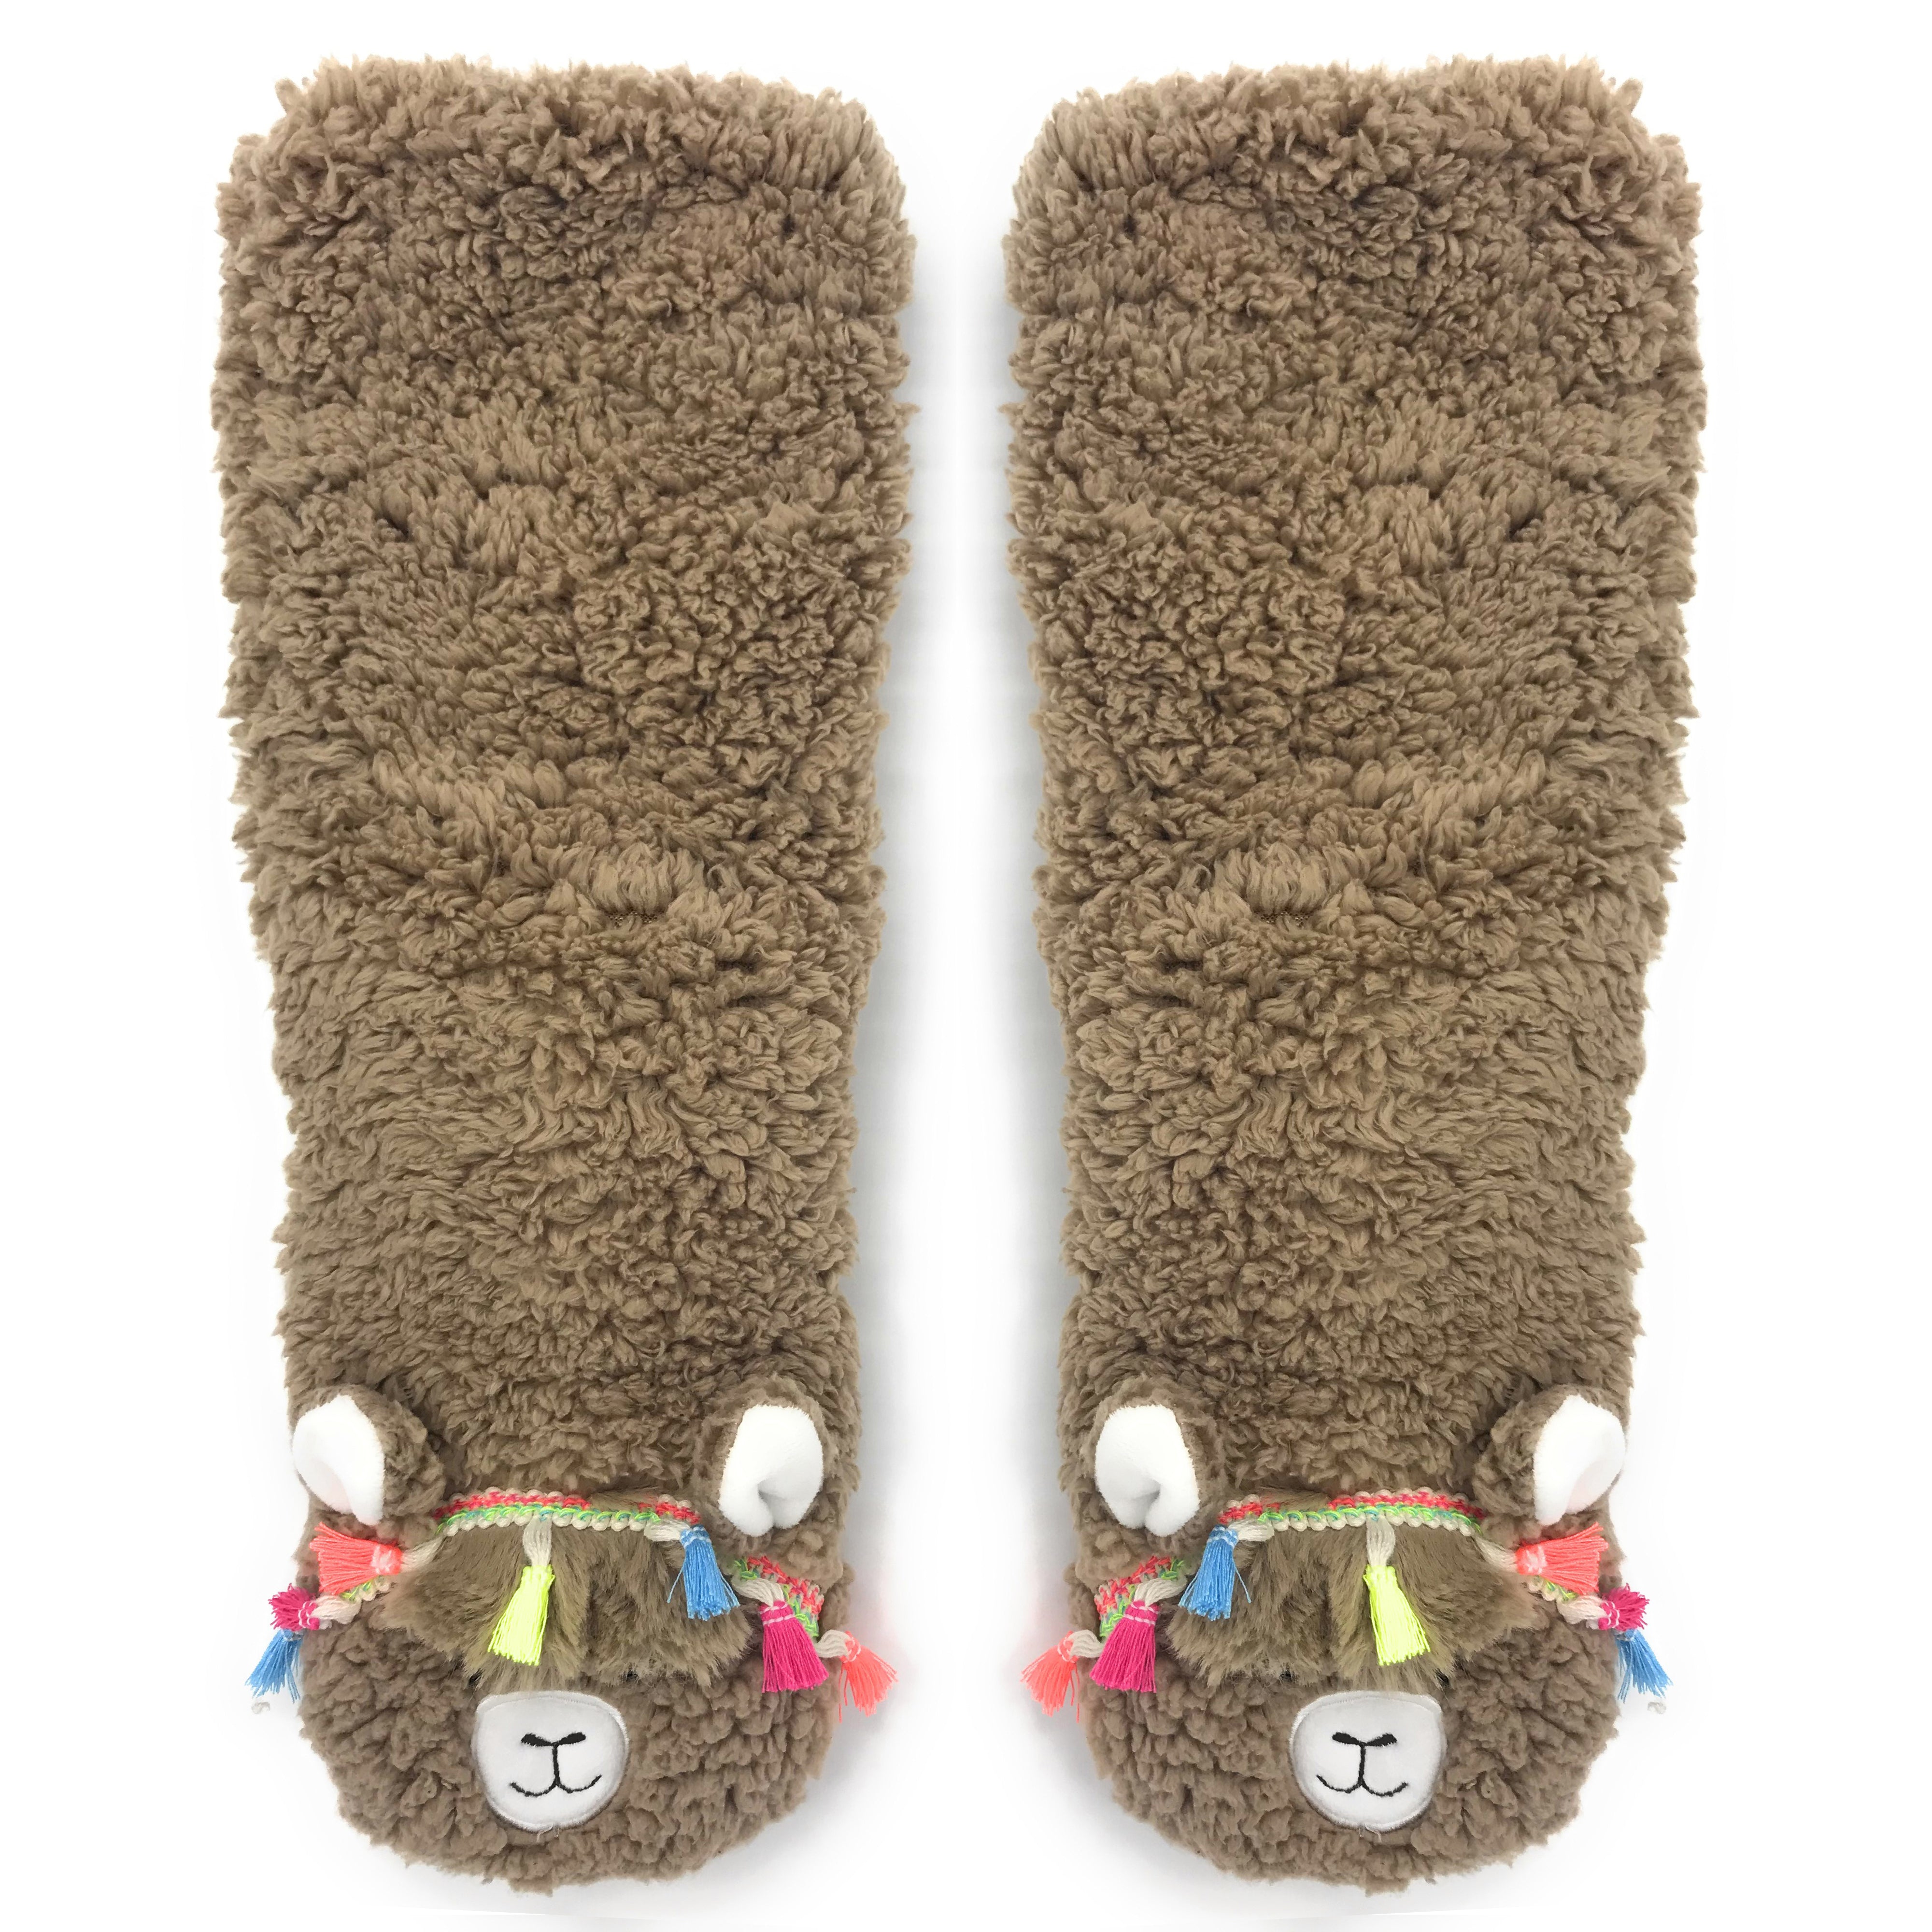 Fuzzy Slippers, Fluffy Comfort & Style